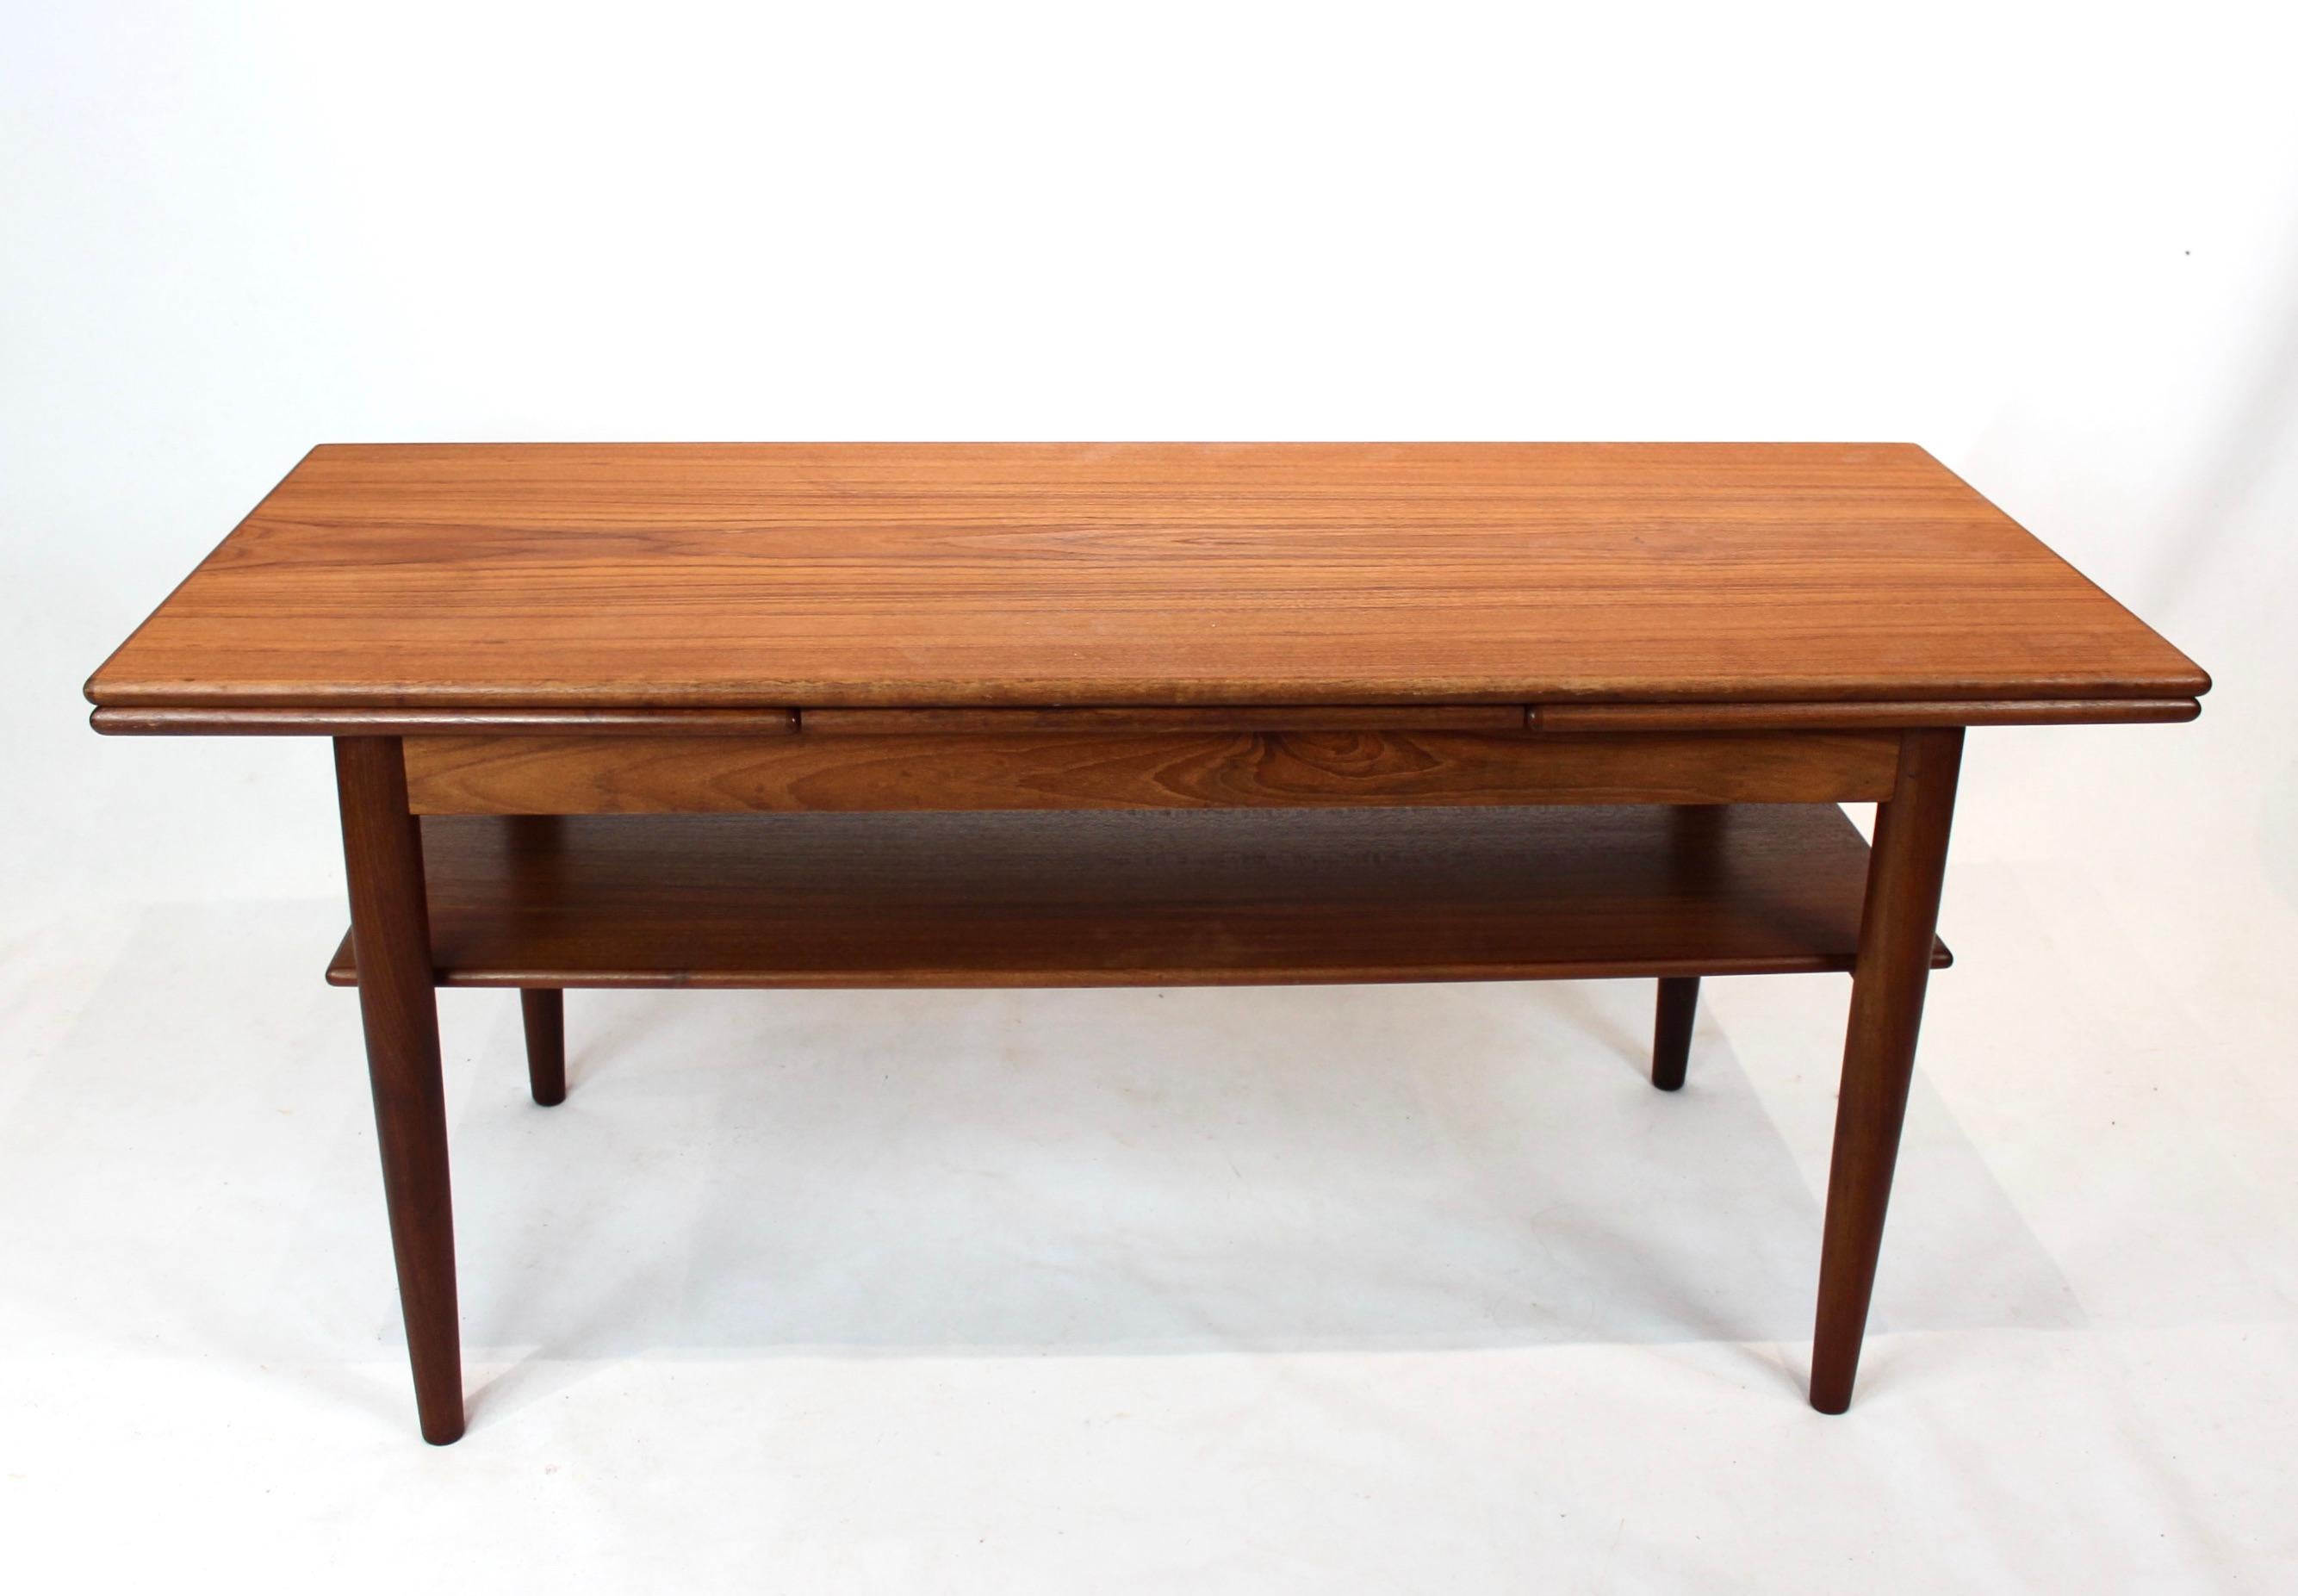 Coffee table in teak with extension leaves of Danish design from the 1960s. The table is in great vintage condition.
Measures: H 54 cm, W 120 cm (2 x 40 cm) and D 50 cm.